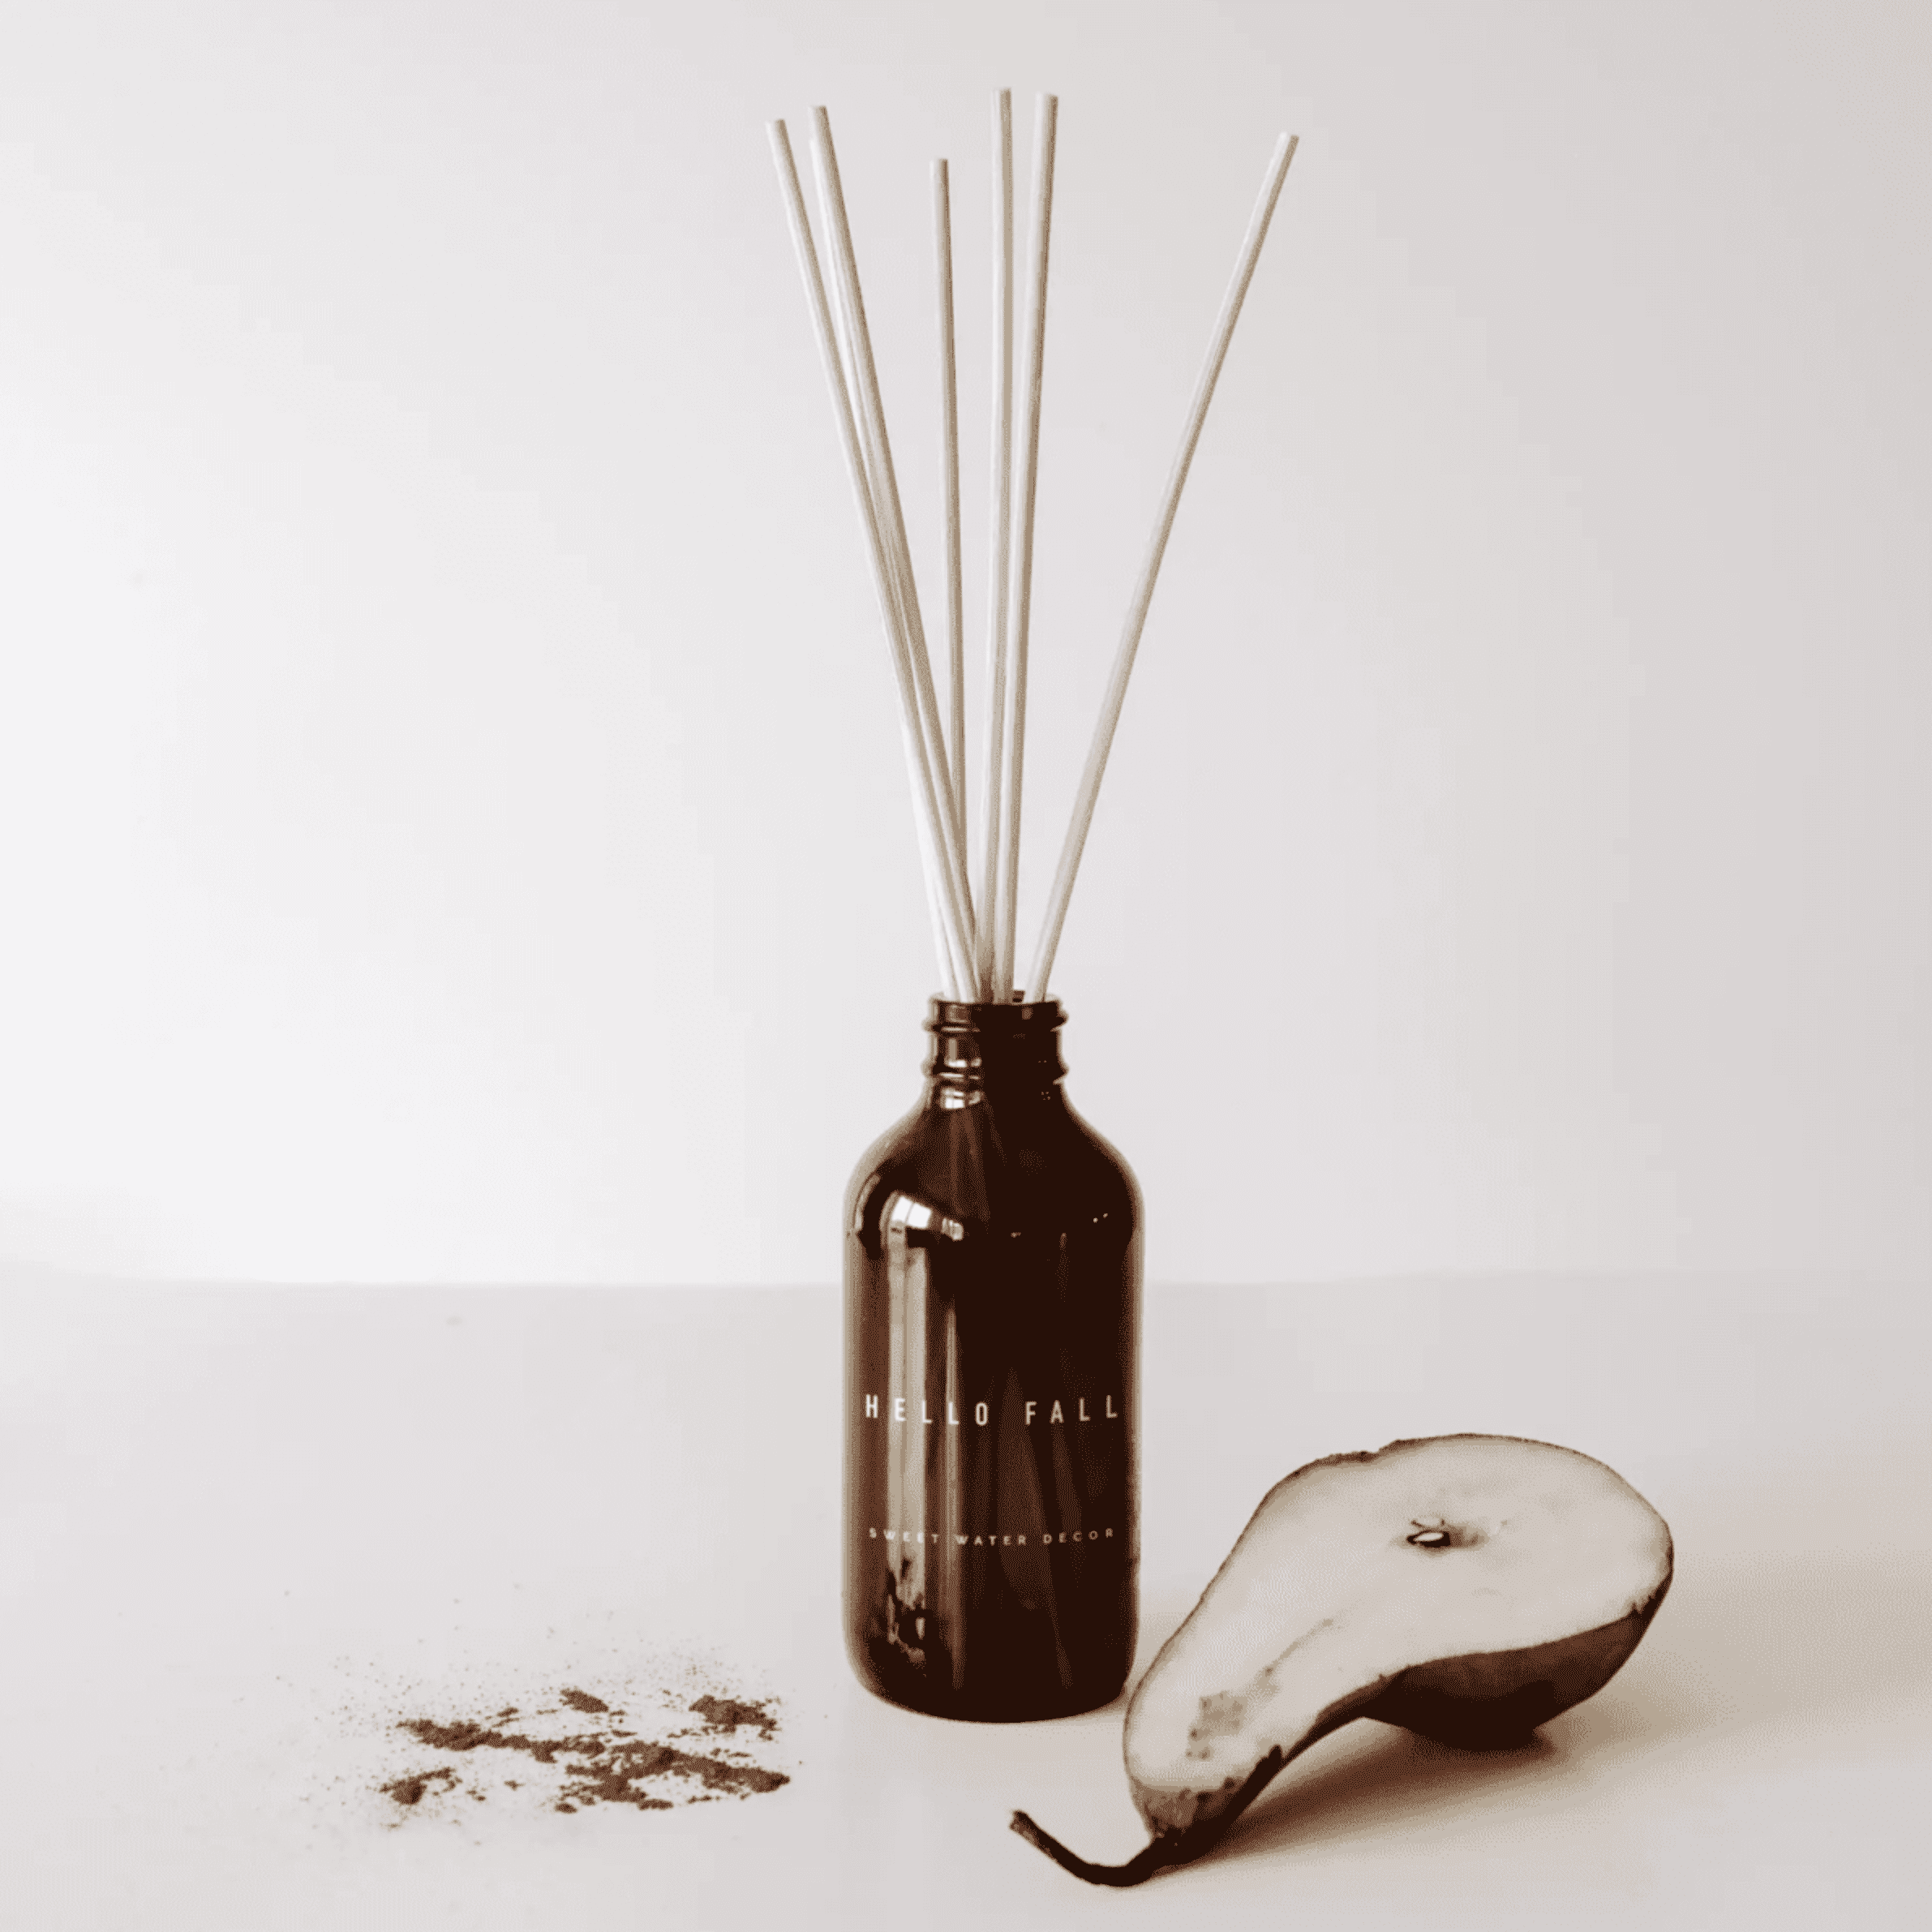 A beautiful reed diffuser in an amber bottle. Warm and inviting aromas of cinnamon, apples, and cloves fill the air. You pour yourself a cup of hot cider. Hello, Fall!